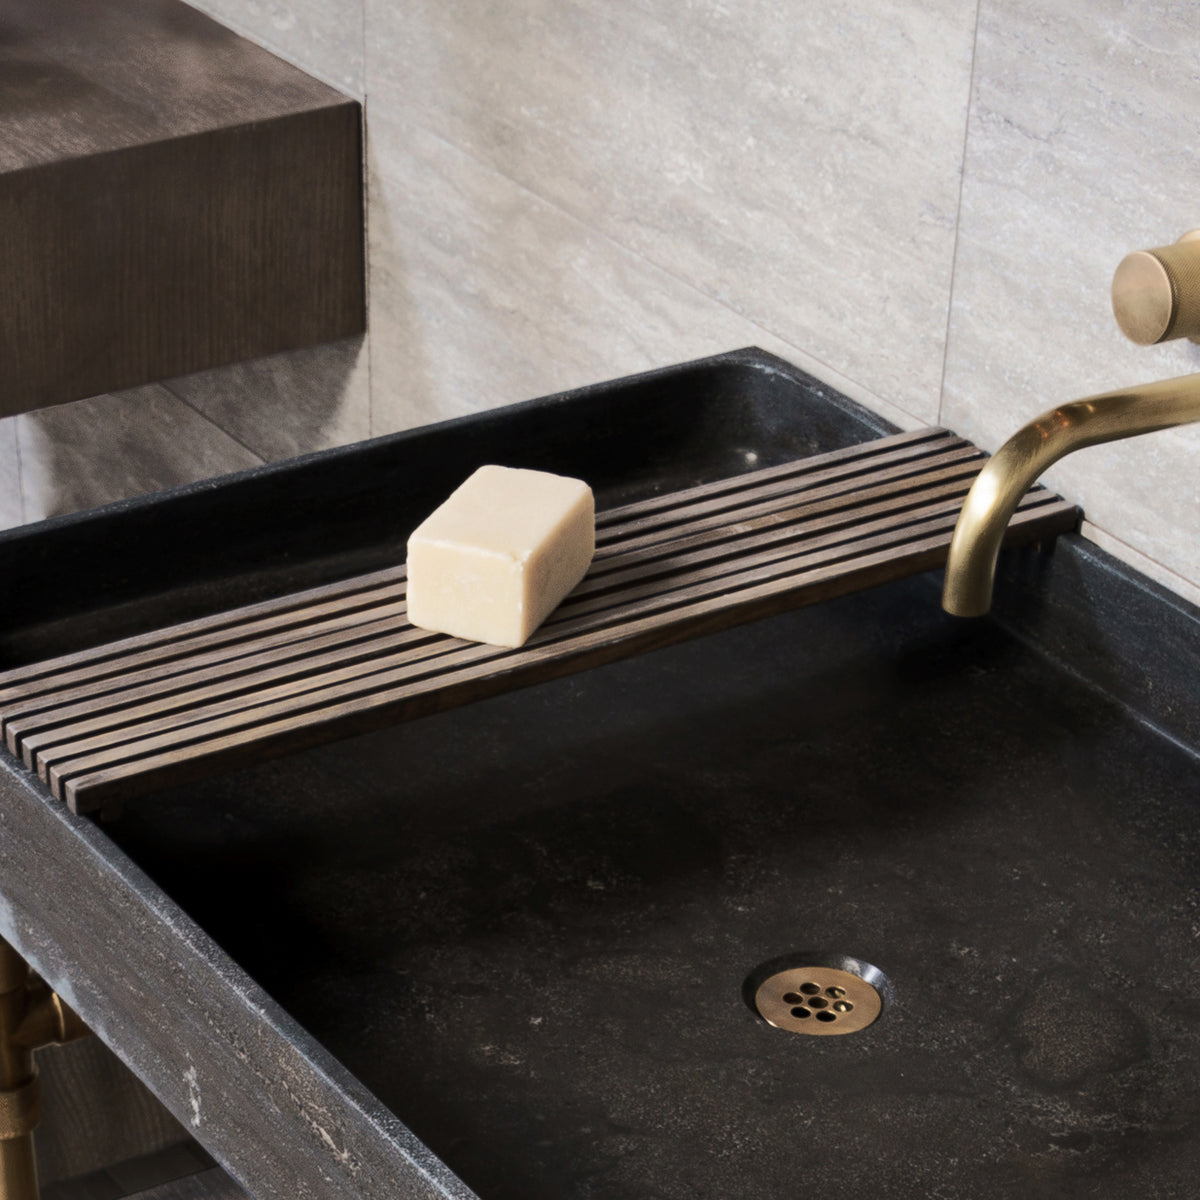 Soap / Accessory Tray for Ventus Bath Sink image 3 of 4